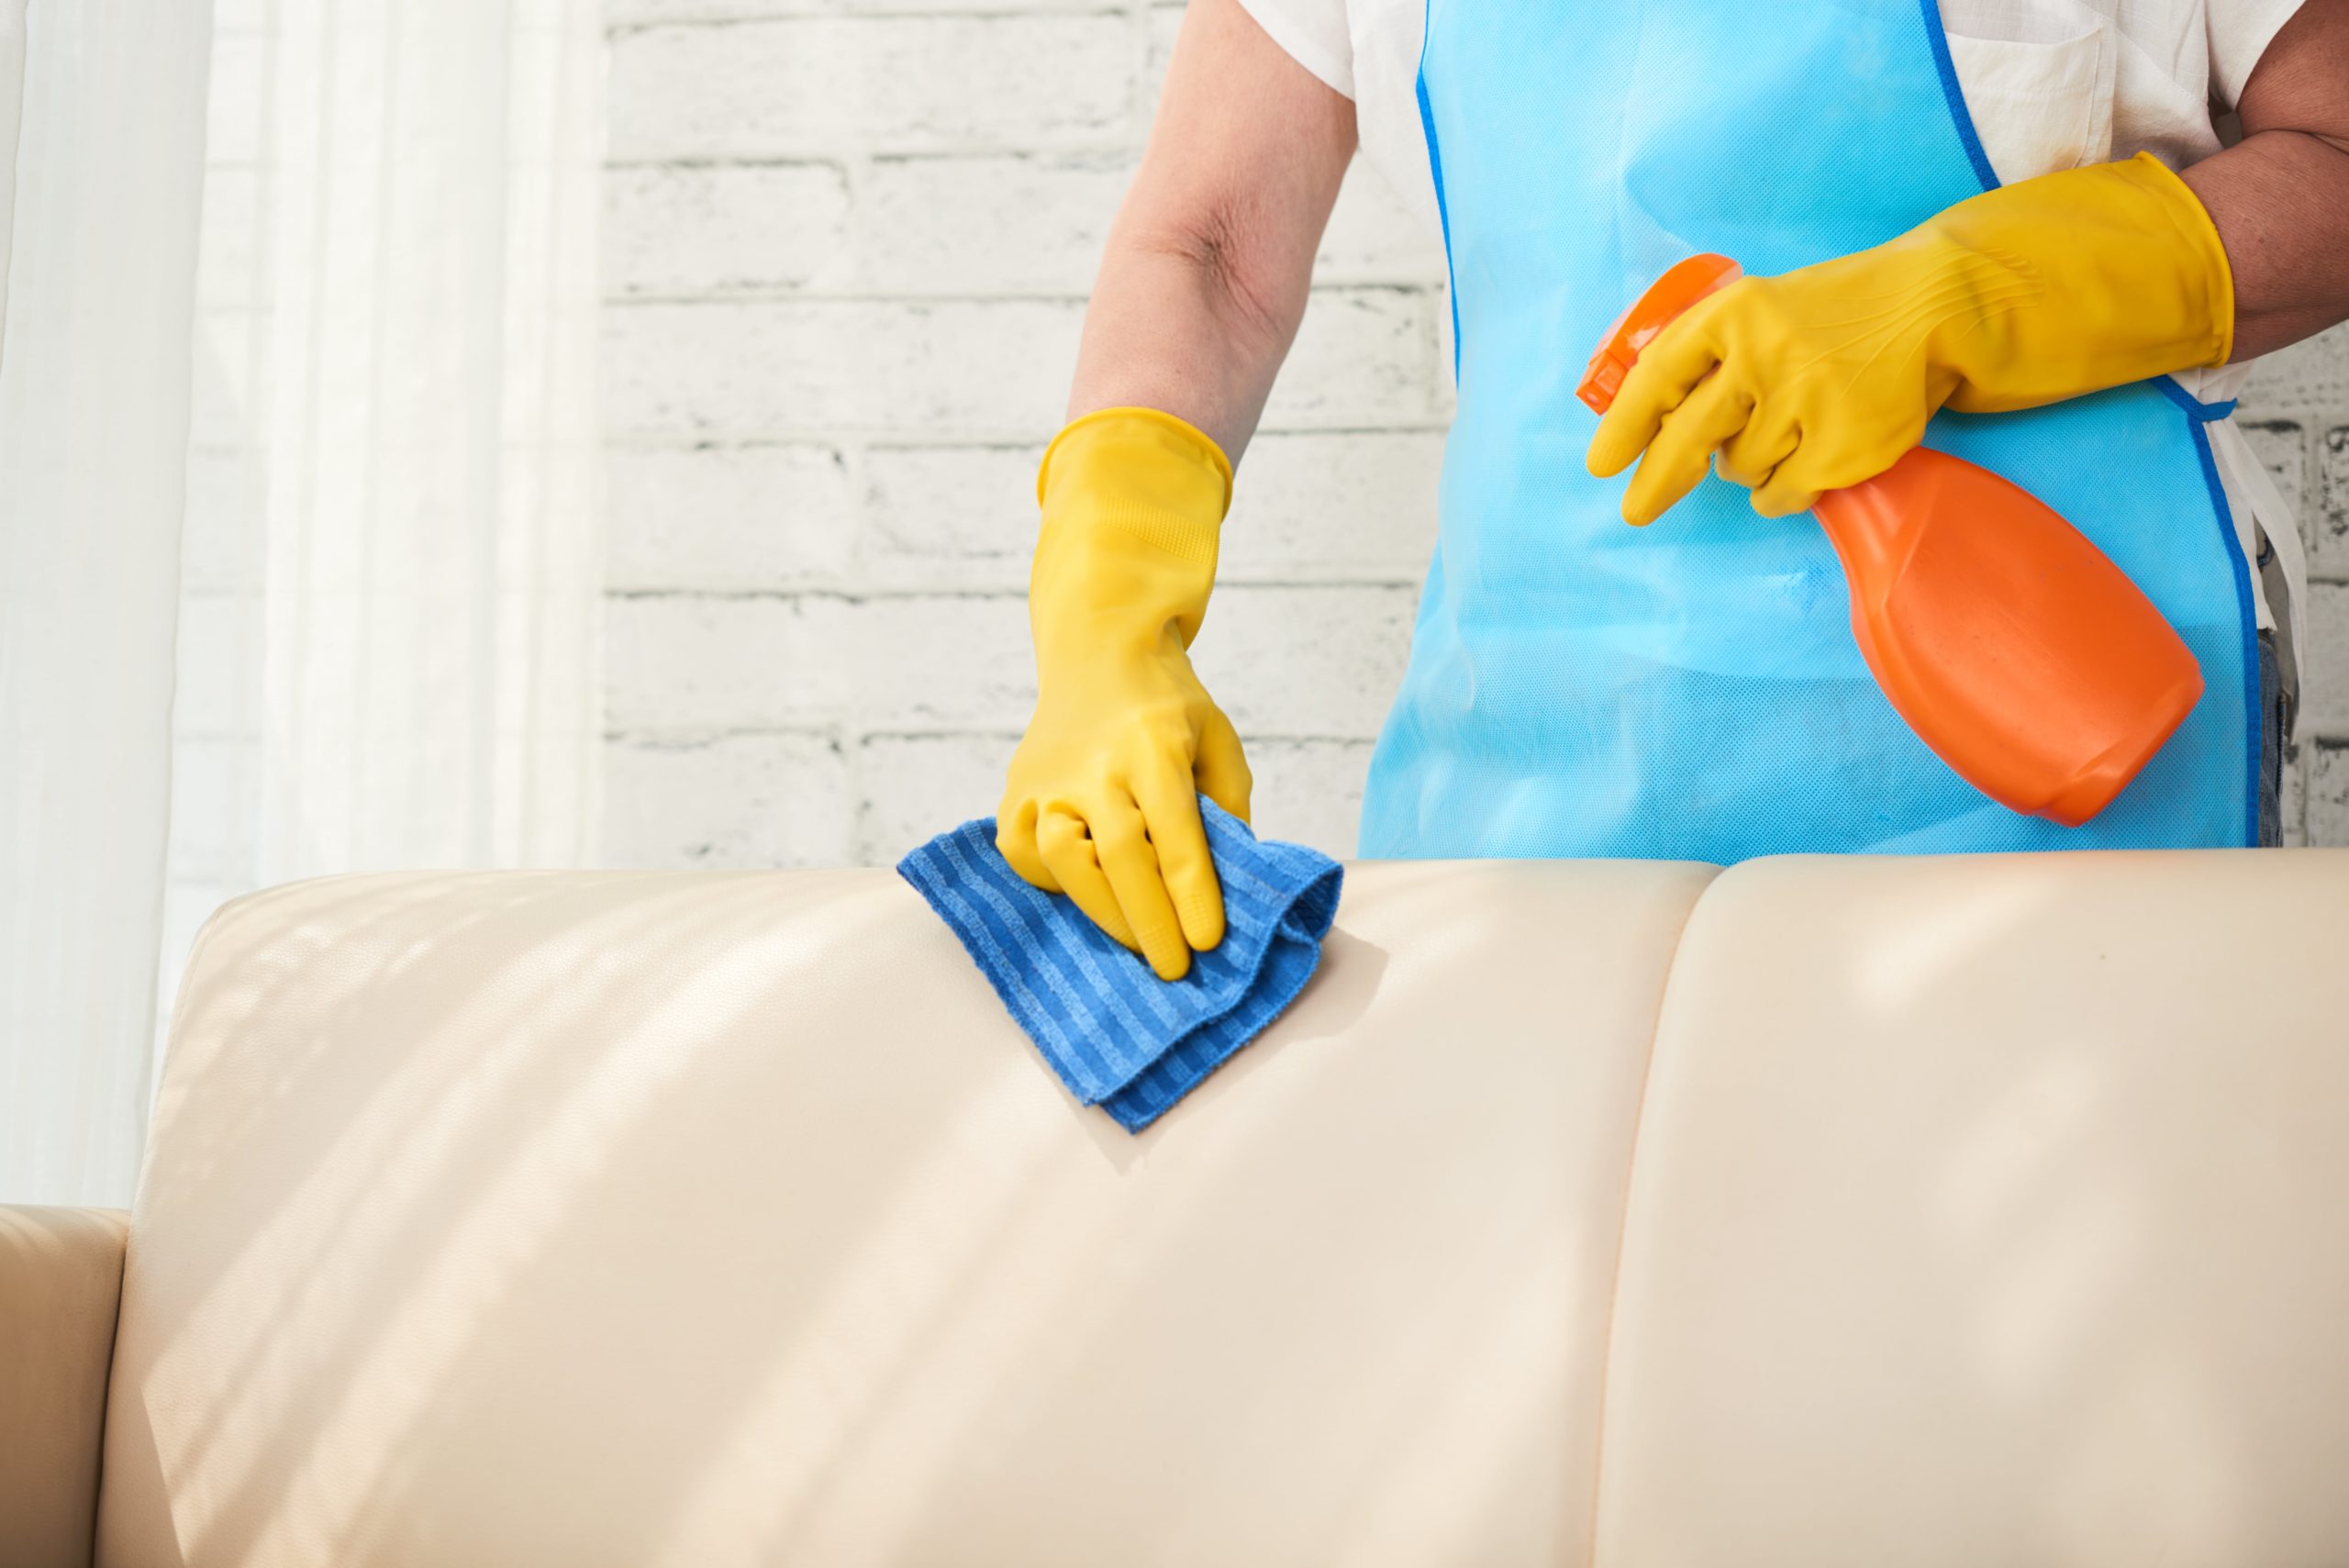 Master cleaners - Sofa Cleaning